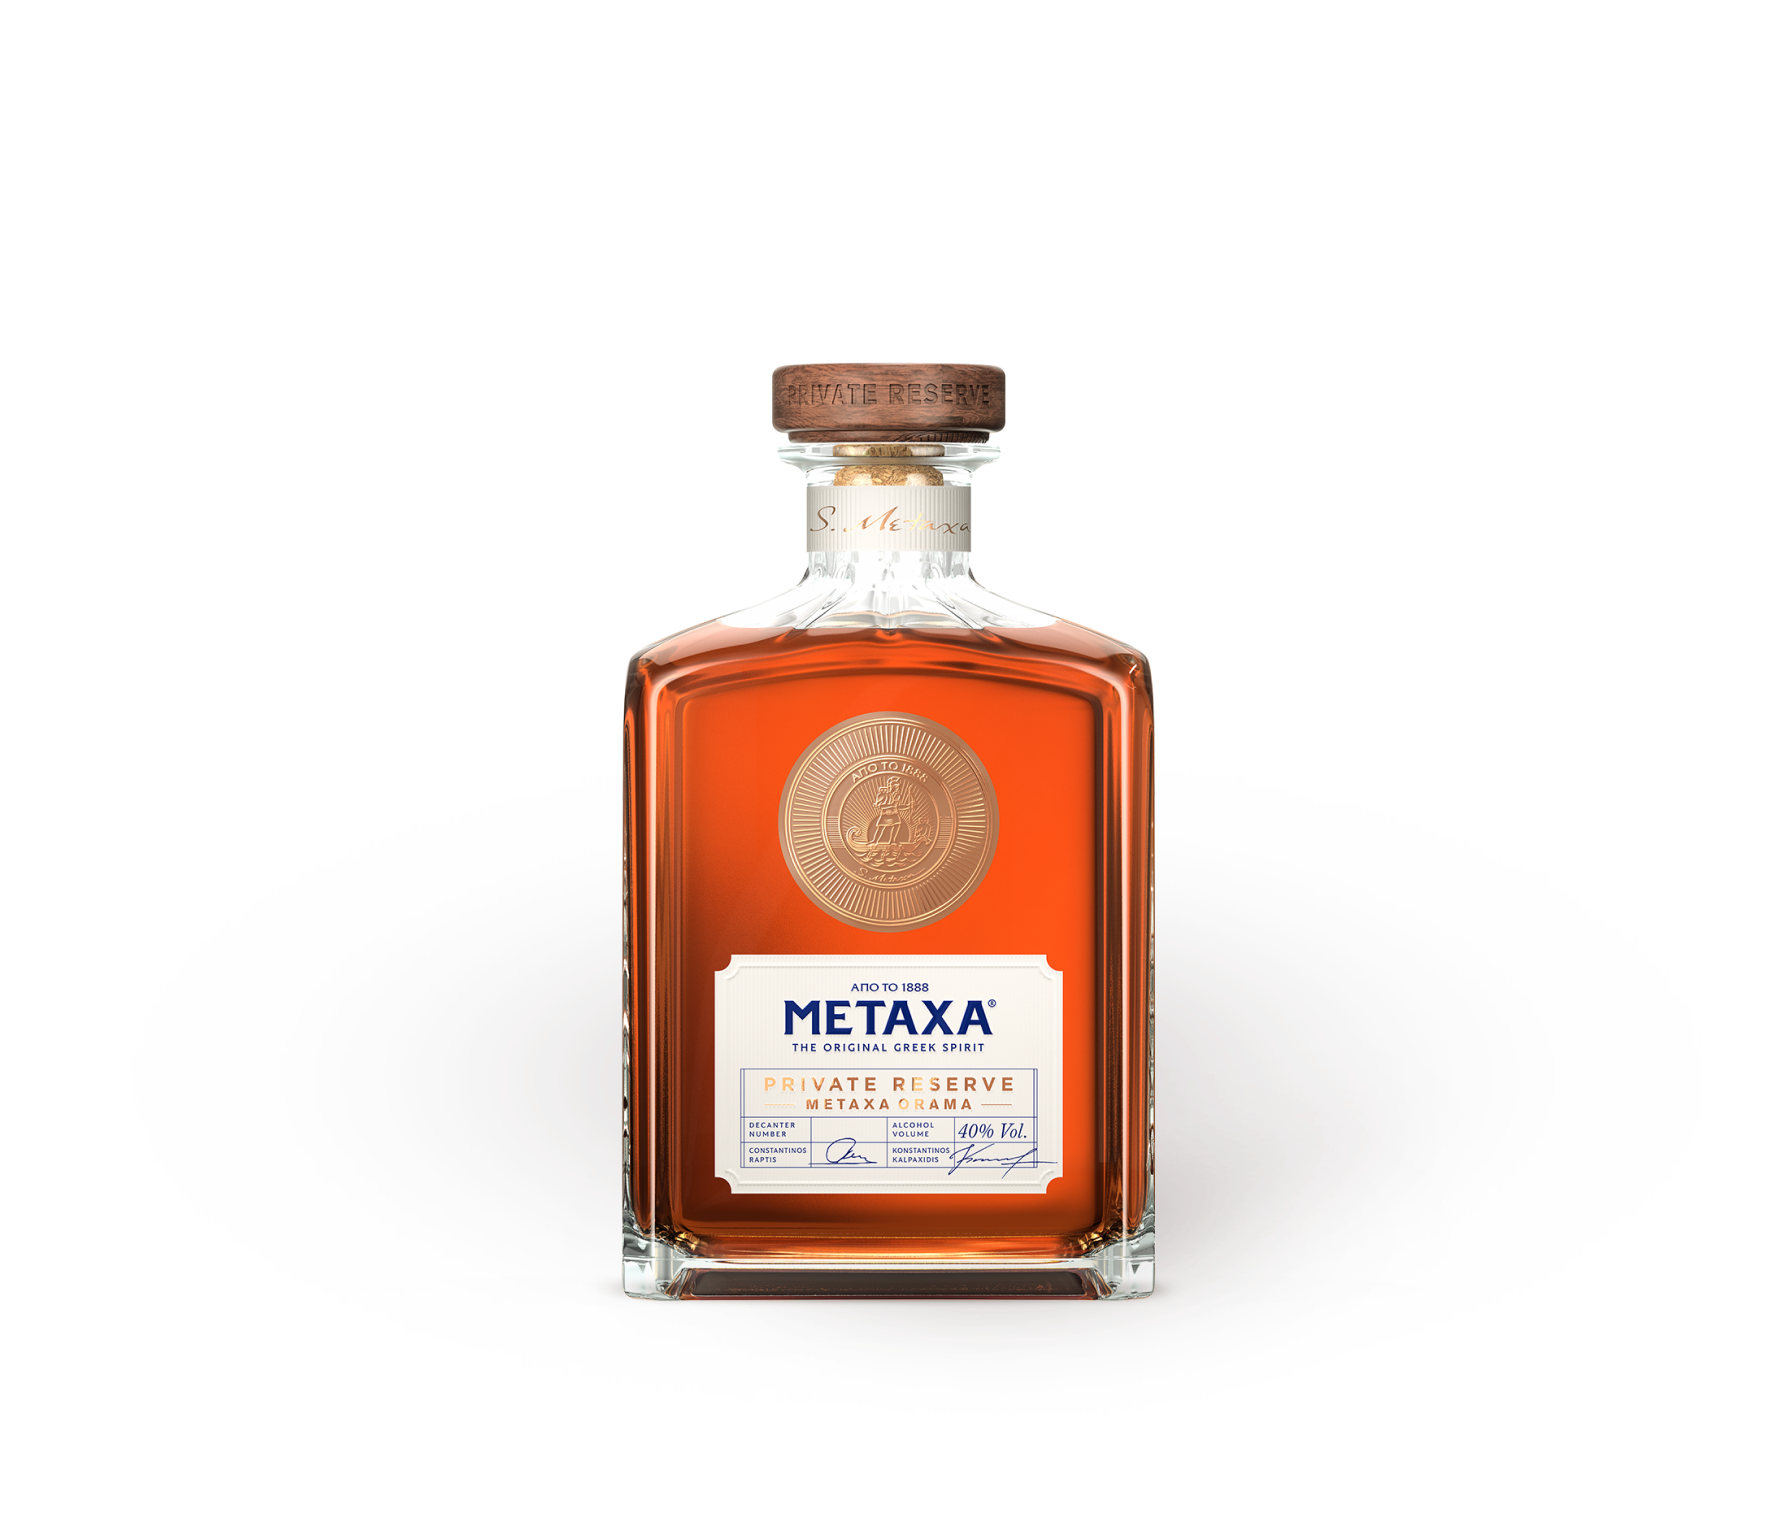 METAXA 12 Stars - spicy notes fruit with dried